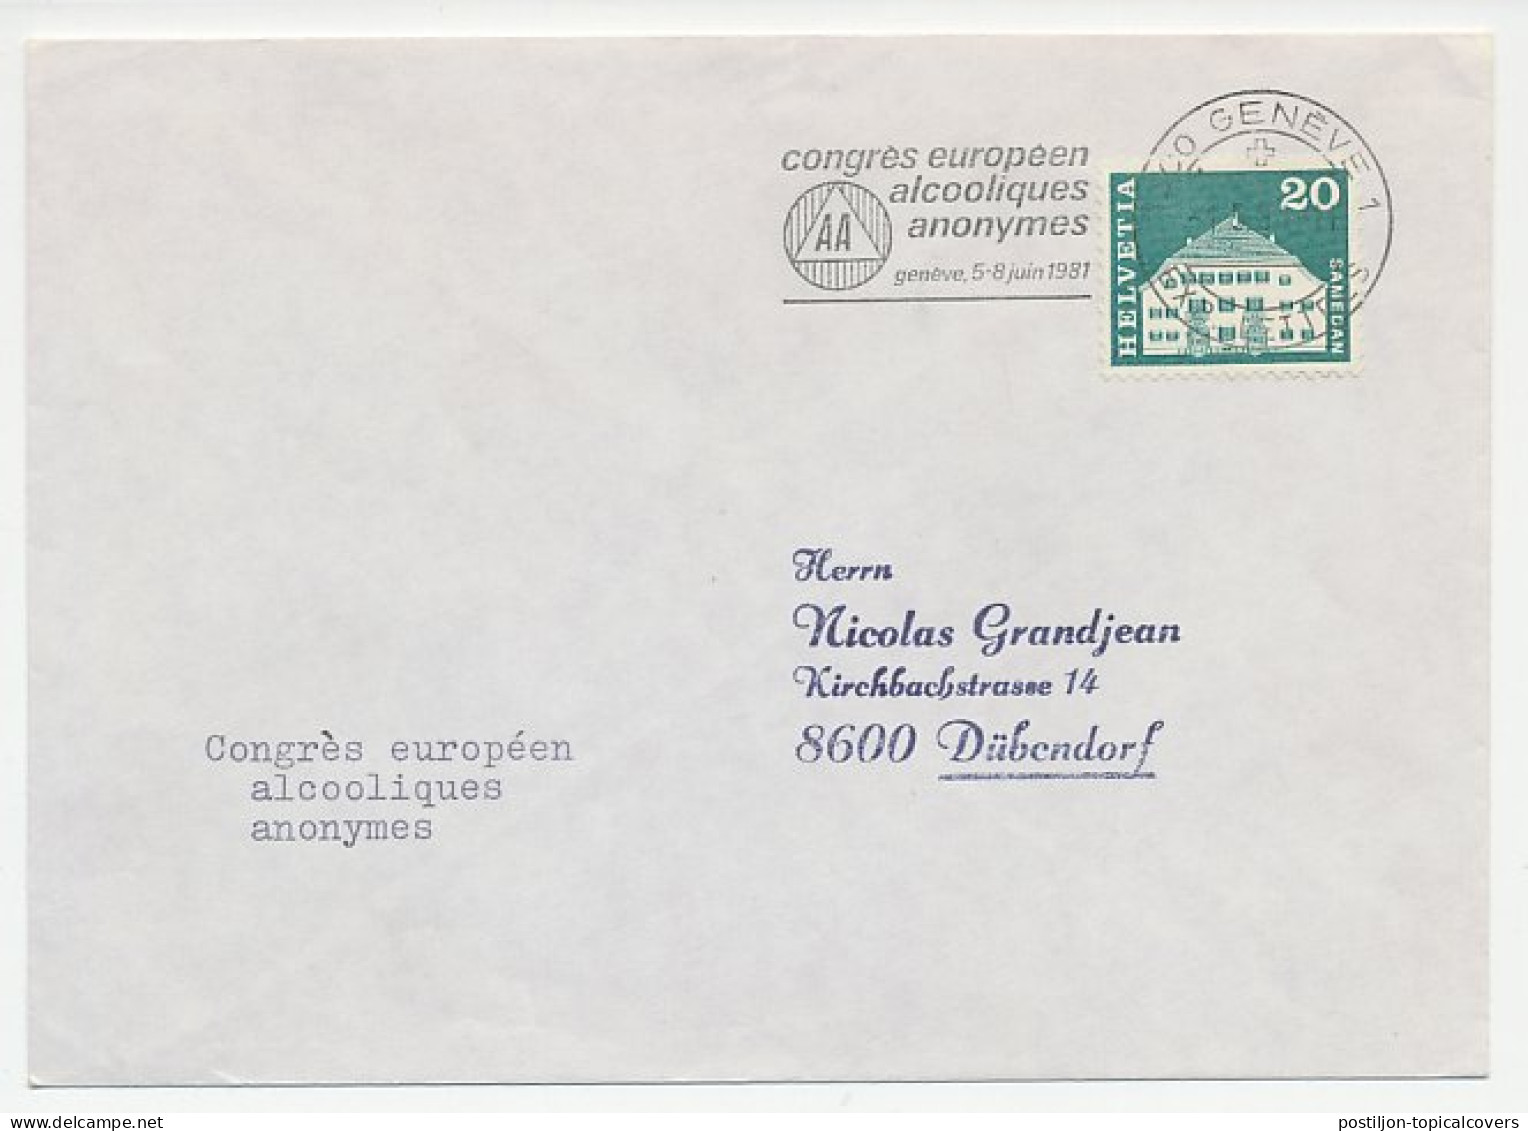 Cover / Postmark Switzerland 1981 Alcoholics Anonymous - European Conference - Wines & Alcohols